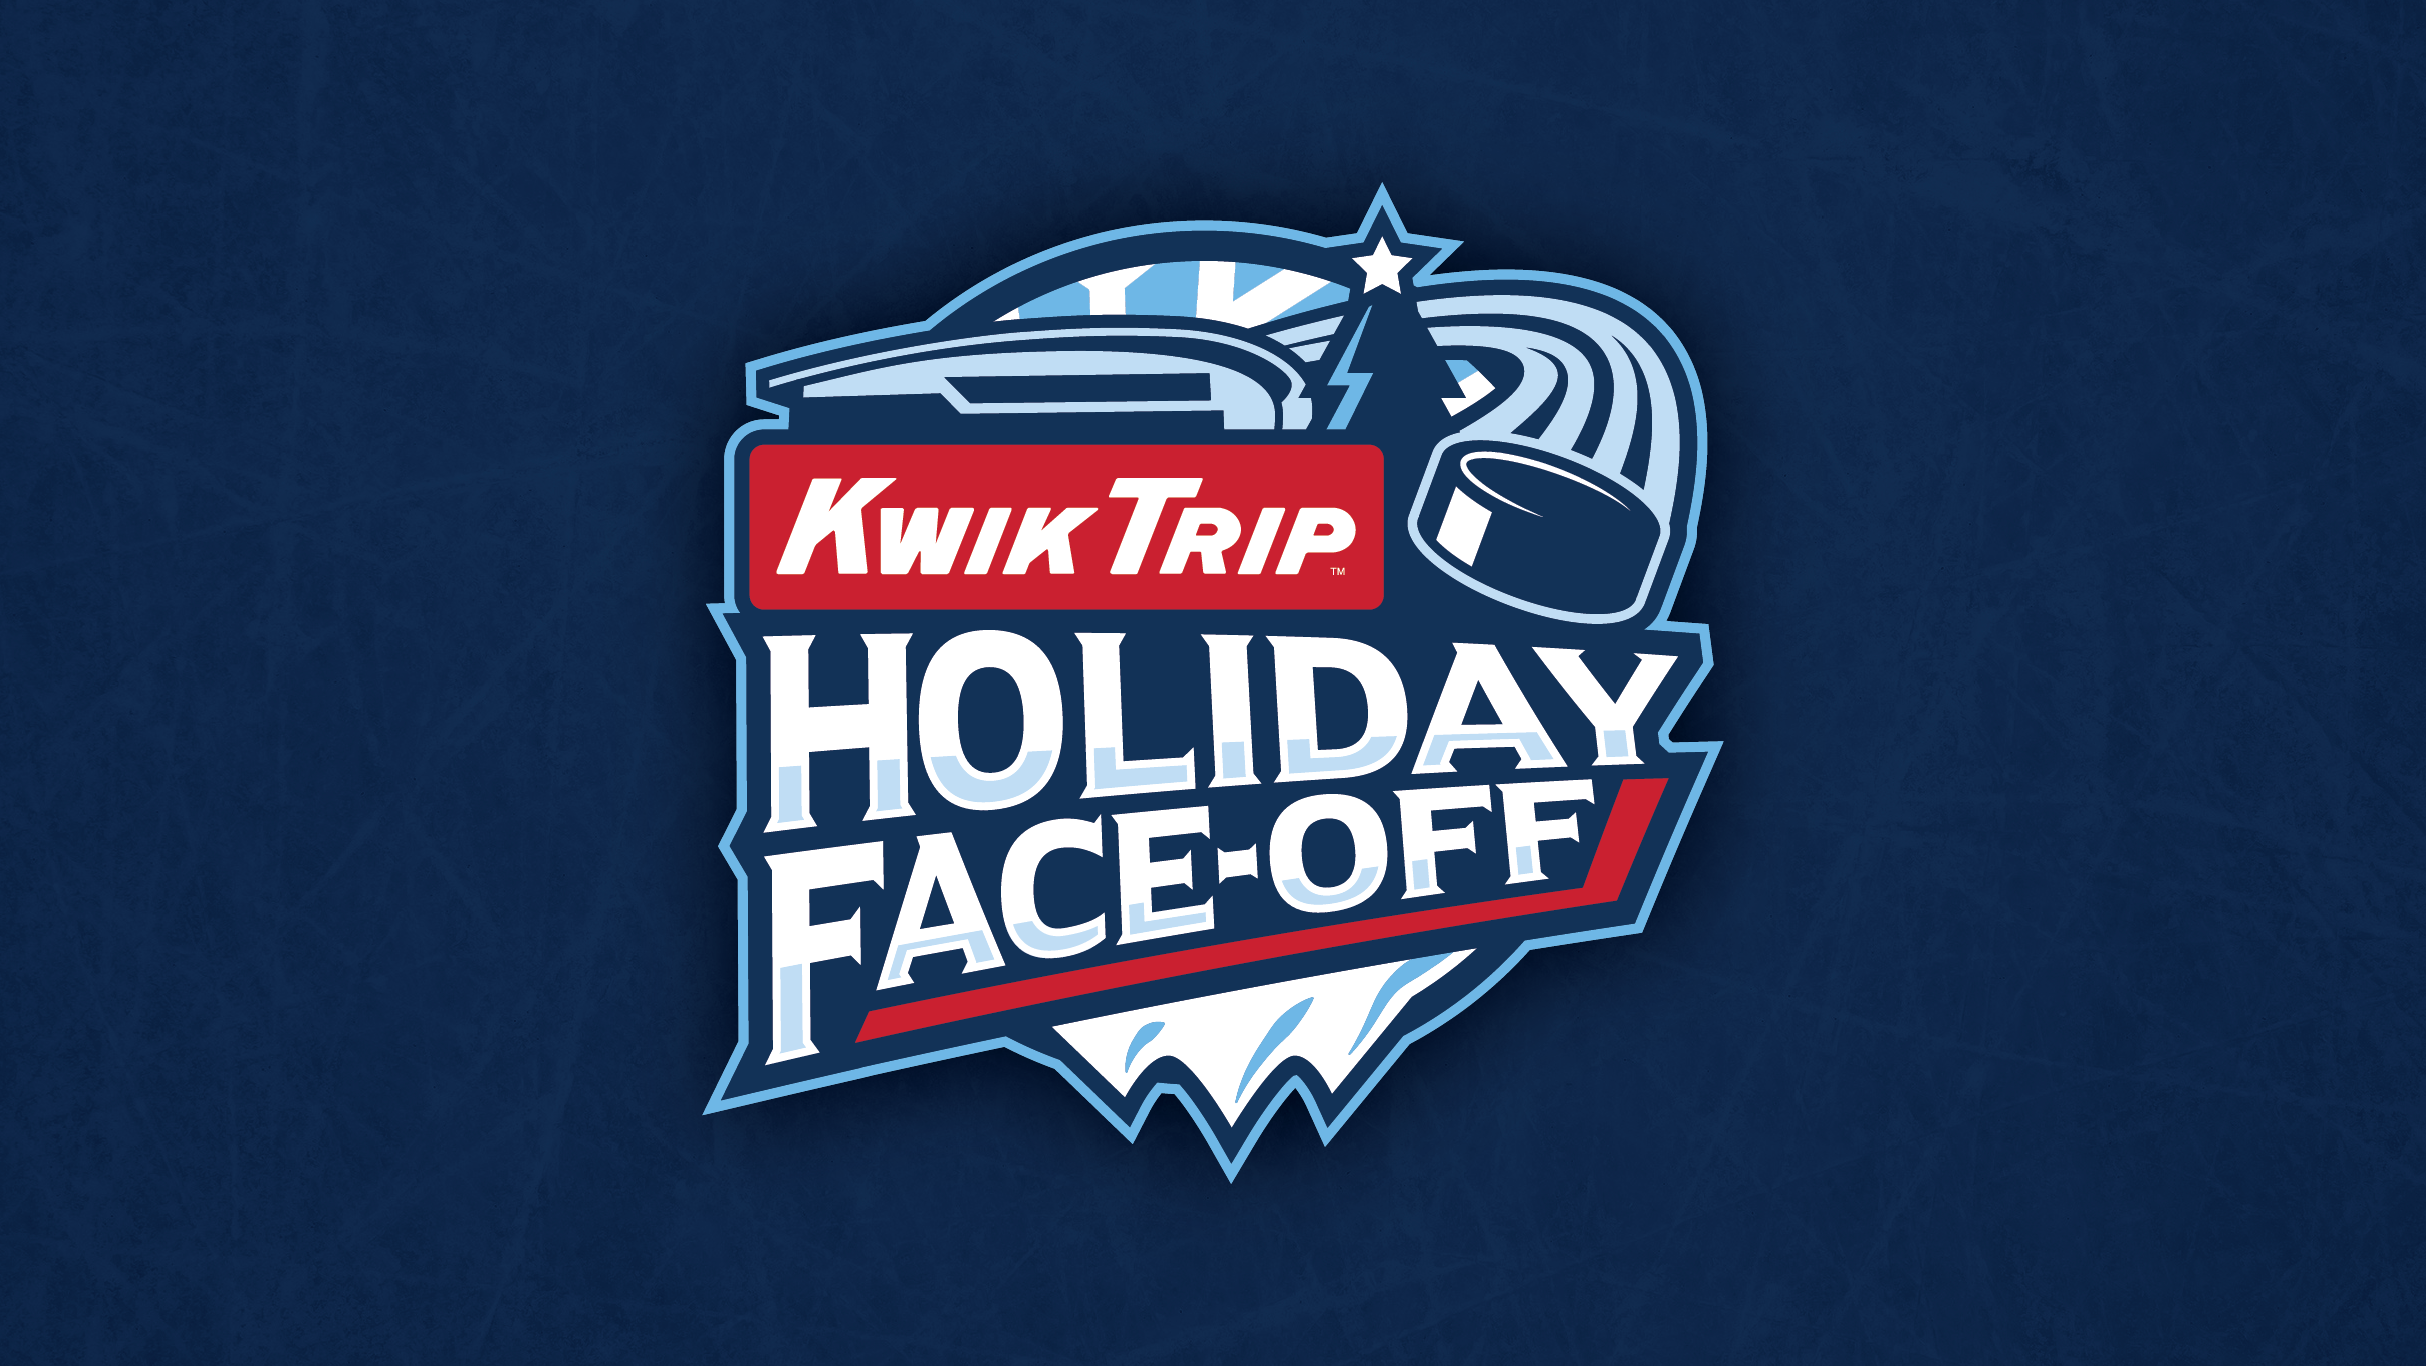 Kwik Trip Holiday Face-Off